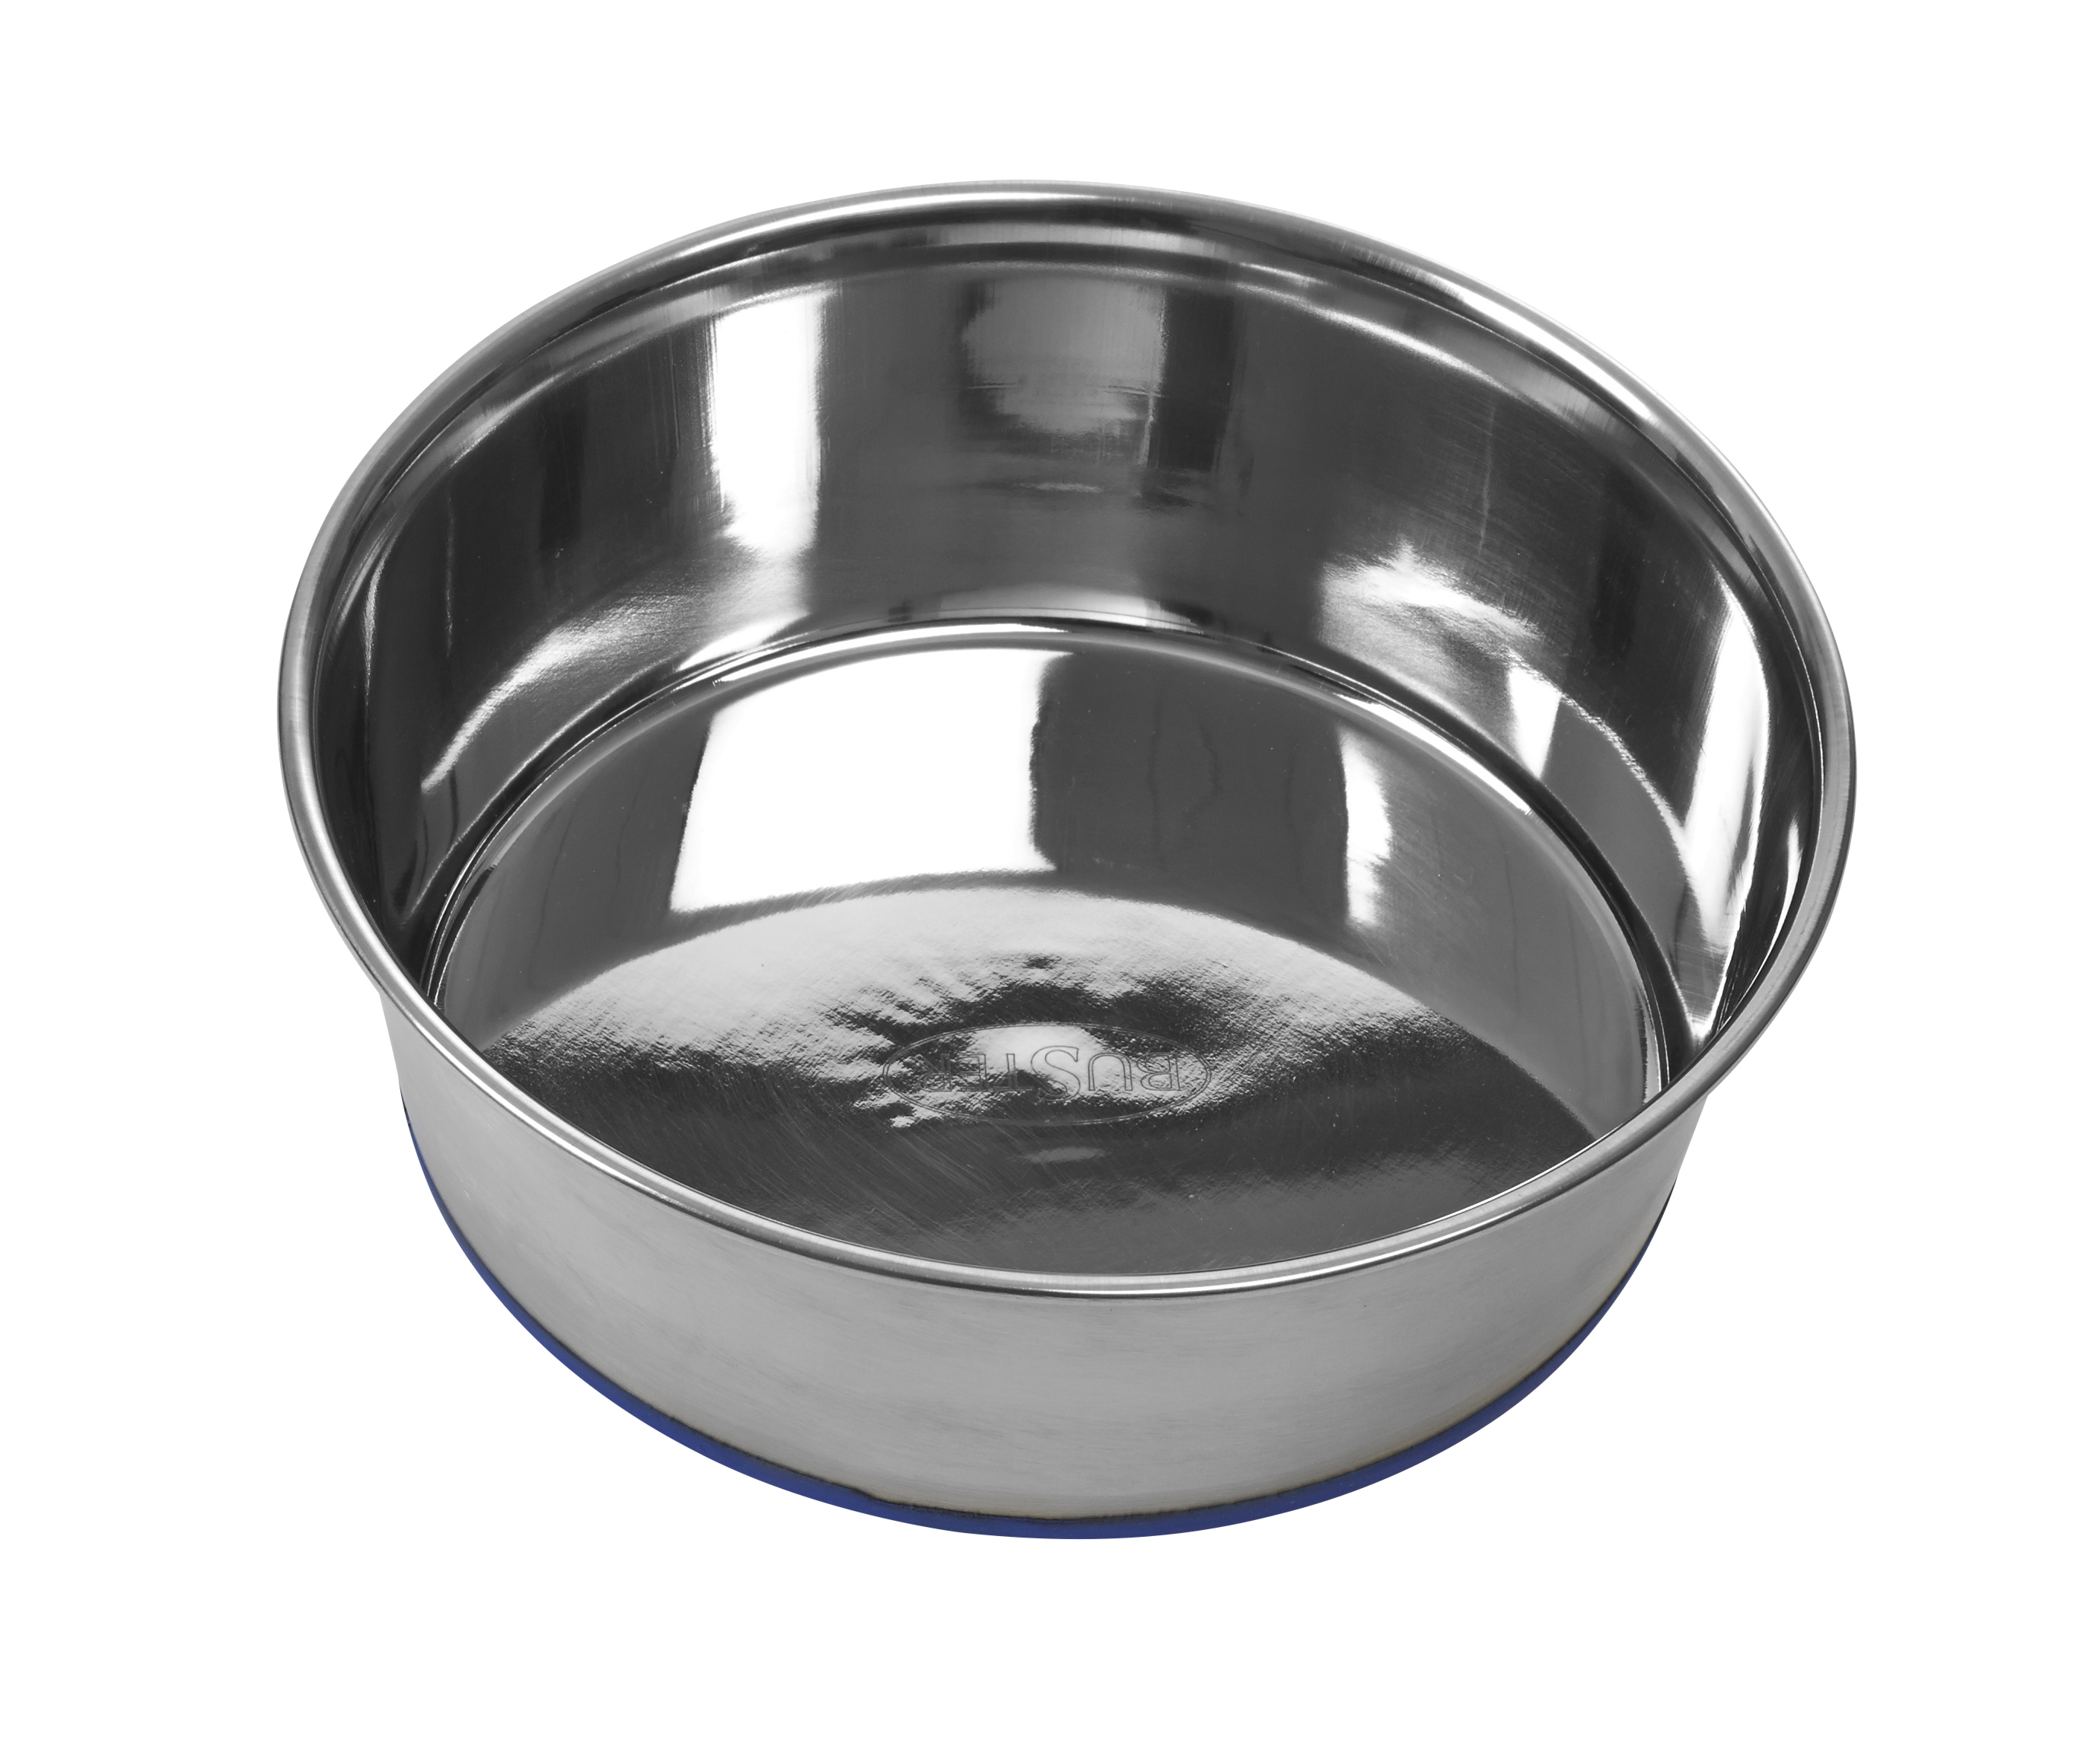 BUSTER Bowl, stainless steel, rubber base, blue, 1,90 L